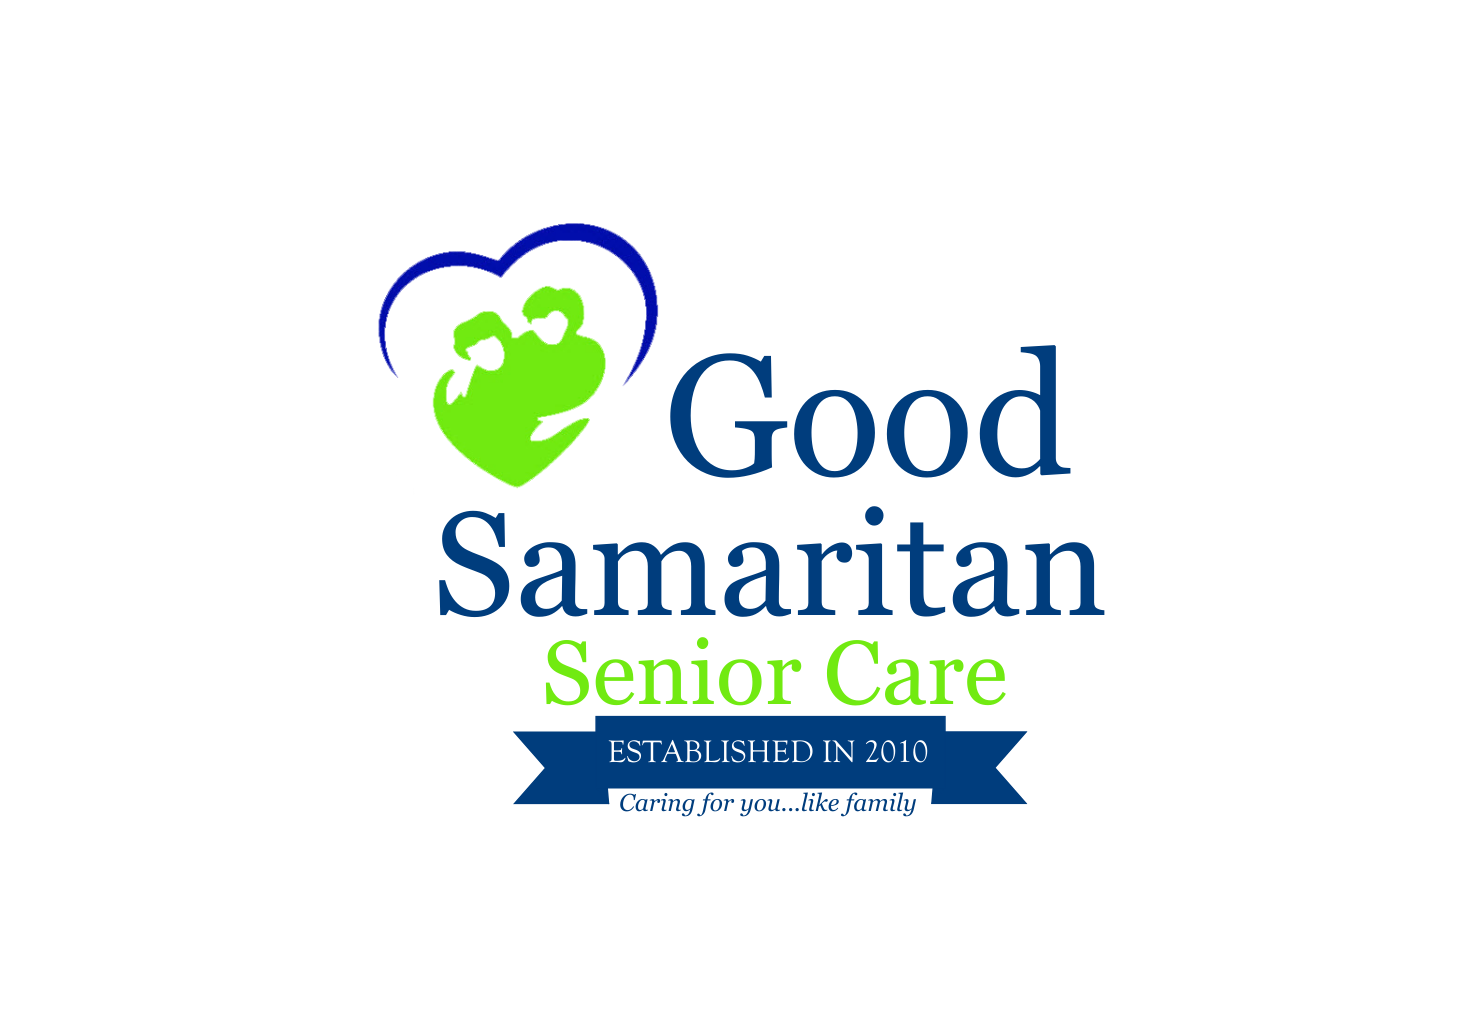 In home health care St. Louis - Best Gifts for Seniors